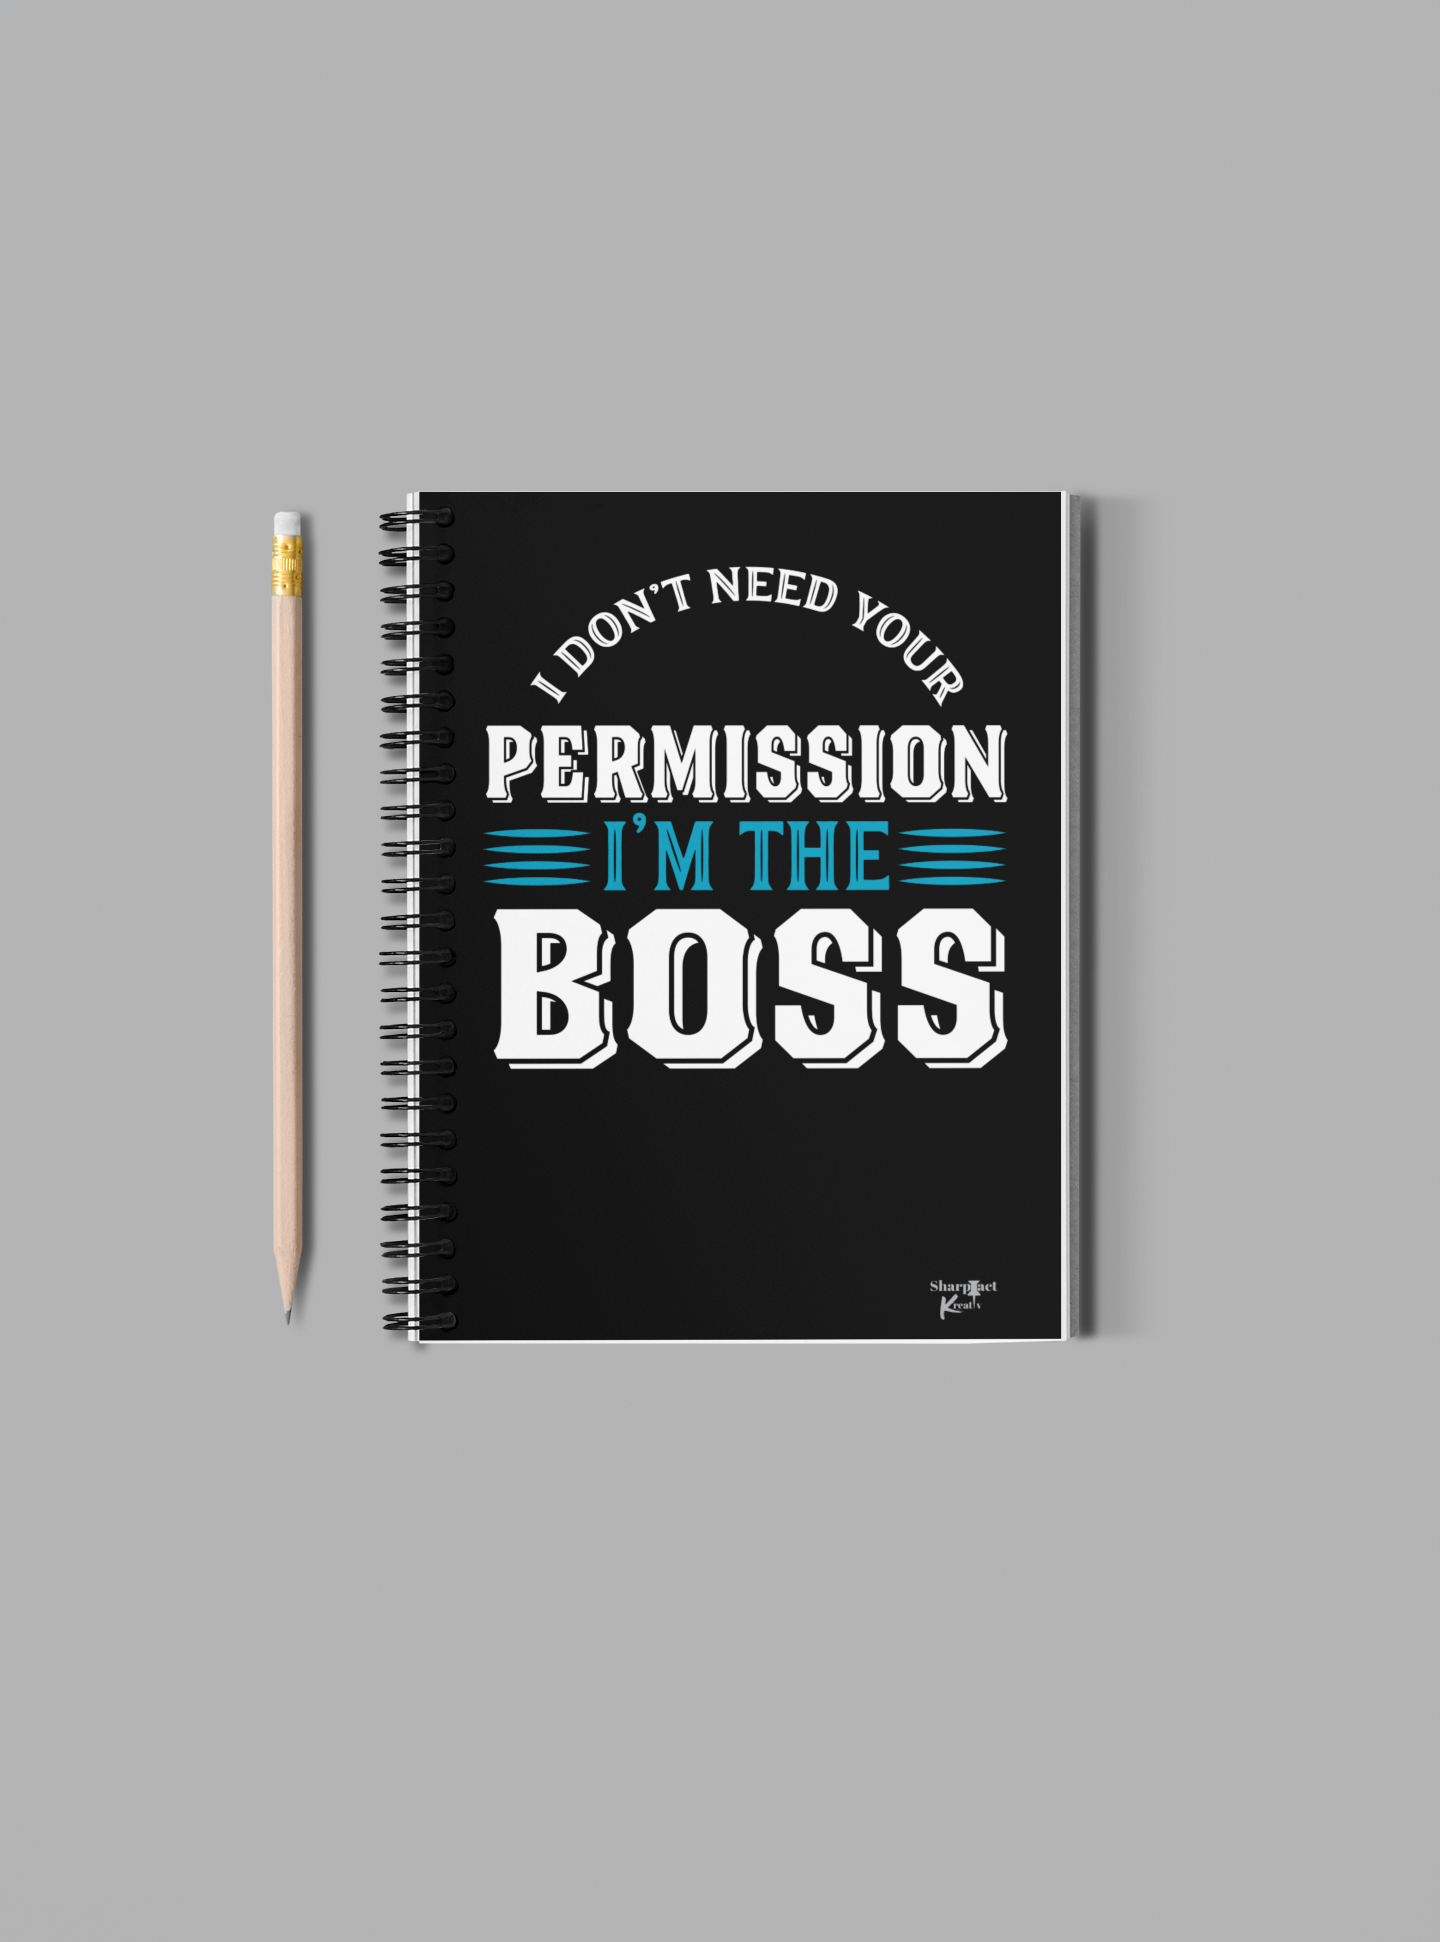 I don't need your permission with the Sharp Tact Kreativ | Tees & Gifts with Encouraging Messages to Brighten Your Day with a Bit of Wit I Don't Need Permission Notebook.